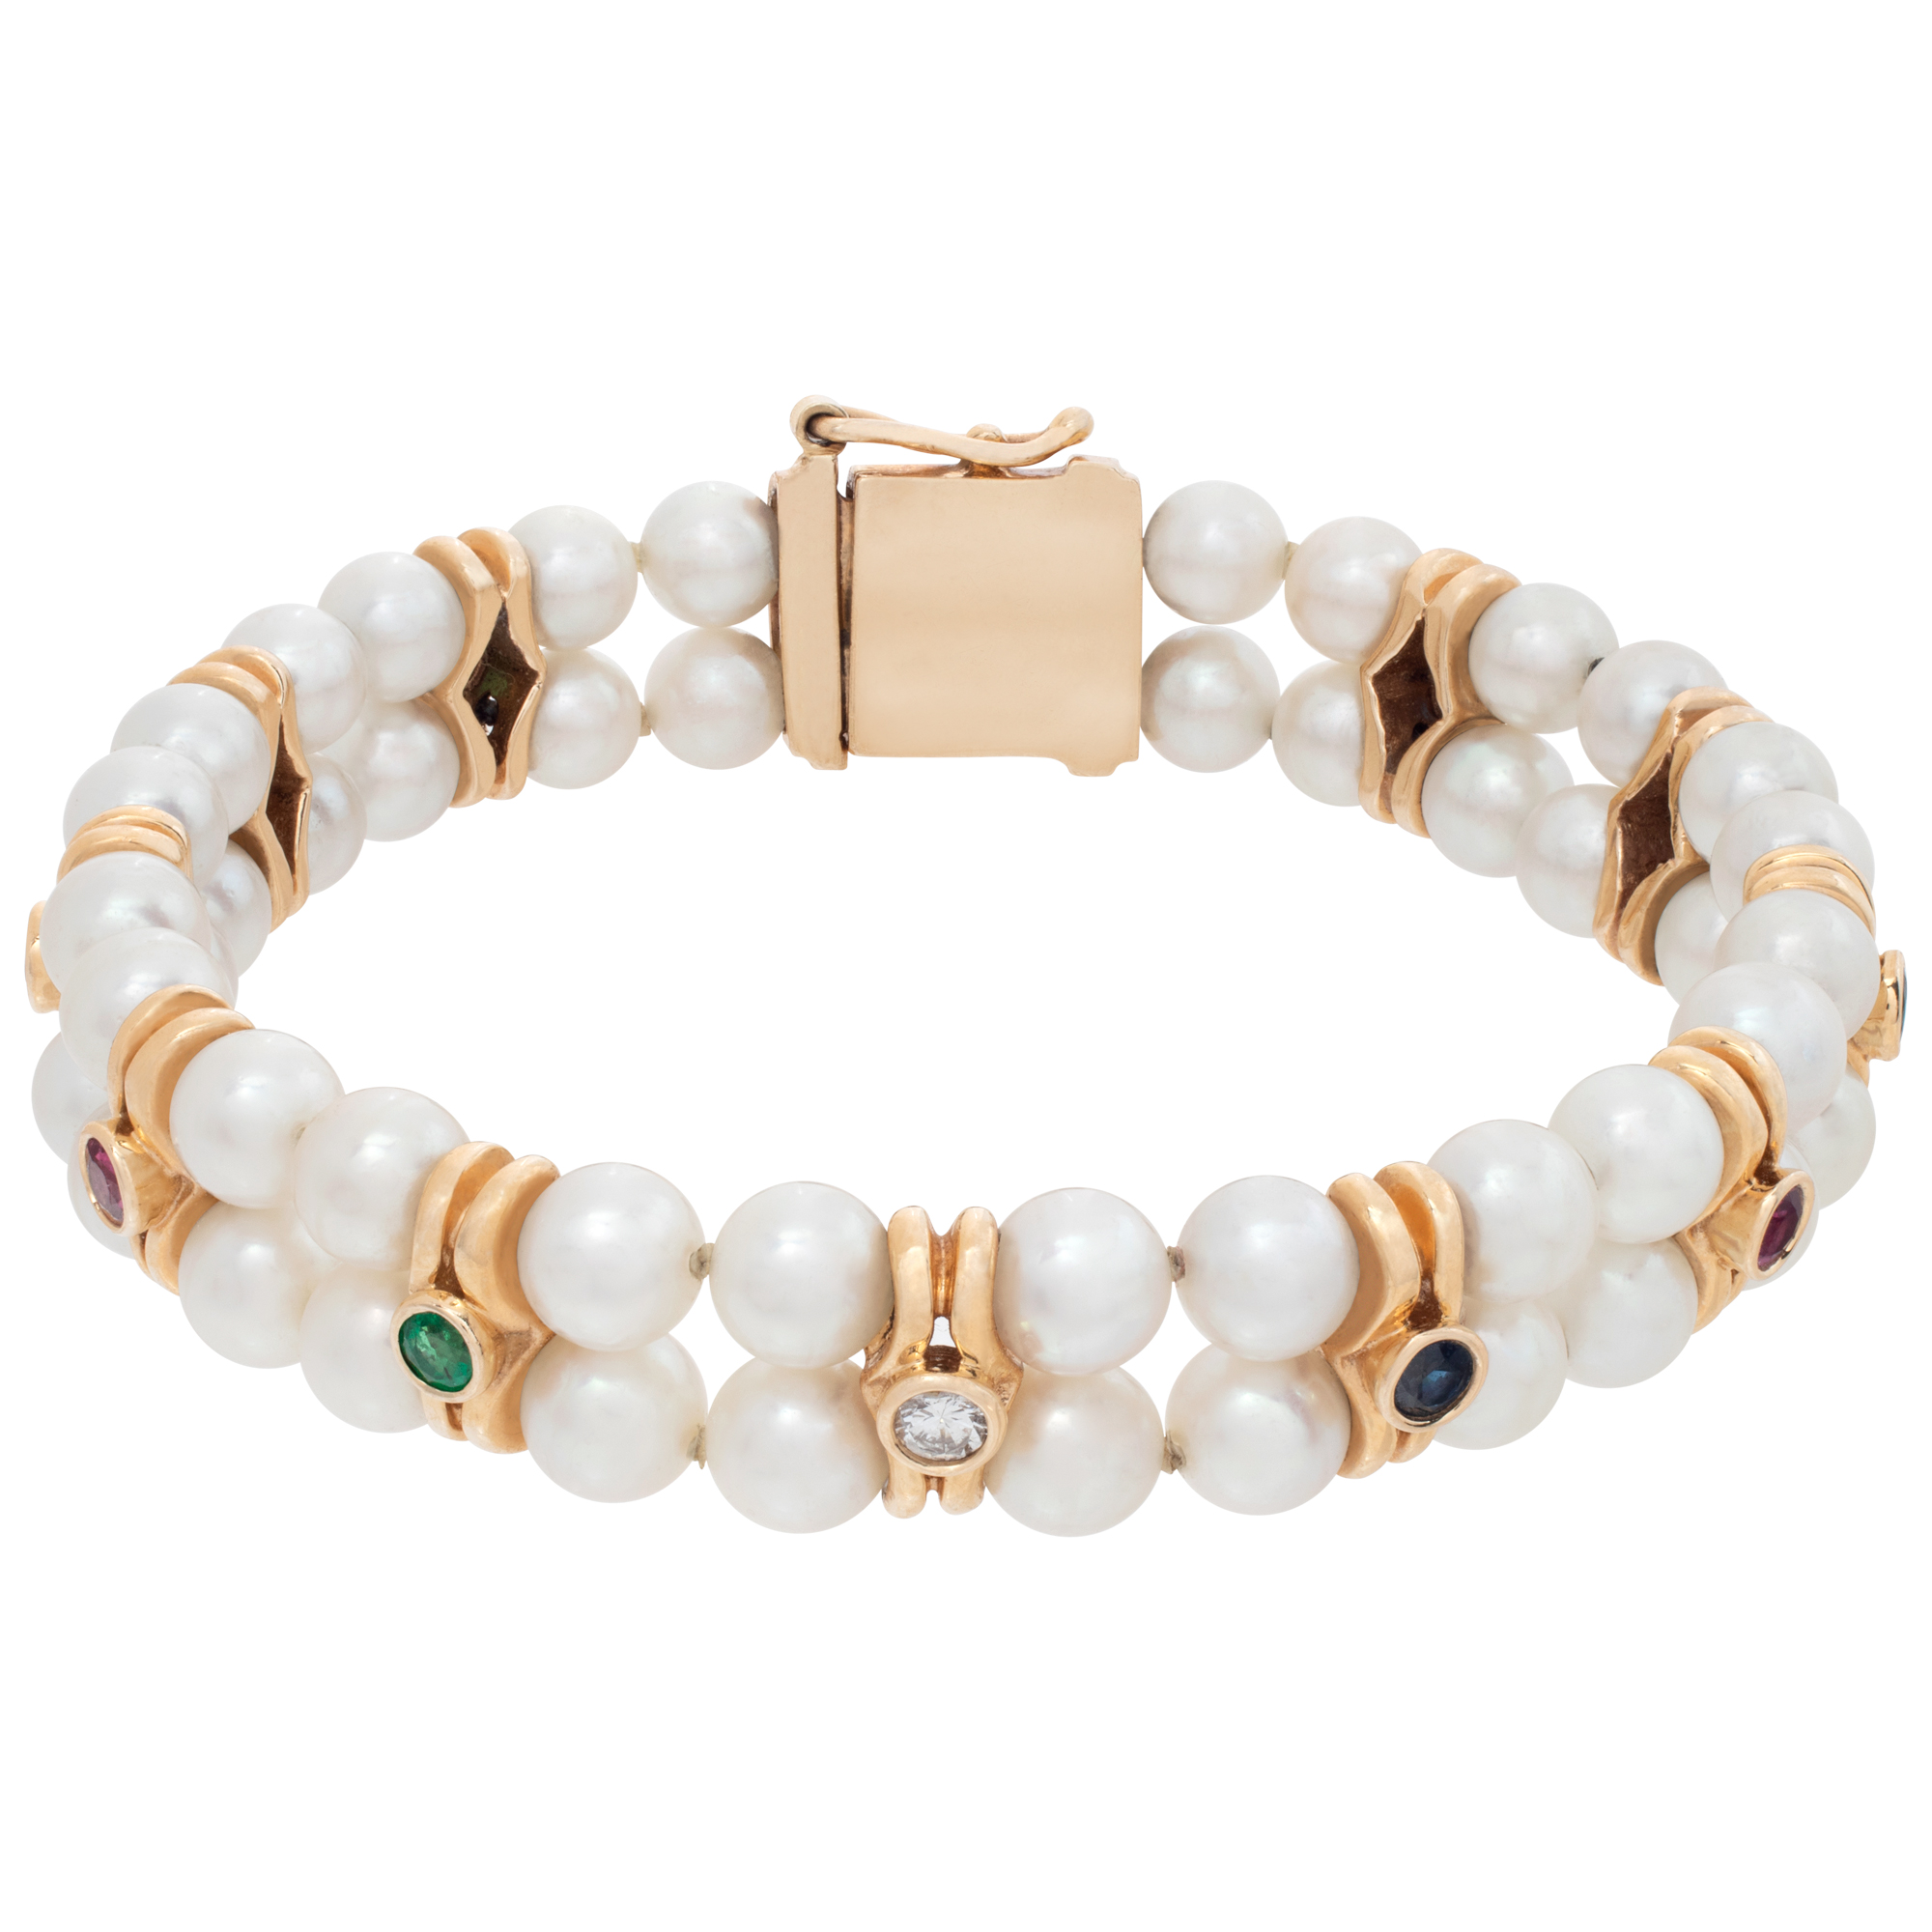 Fresh water pearl bracelet with rubies, diamonds, sapphires and emeralds,set in 14k yellow gold